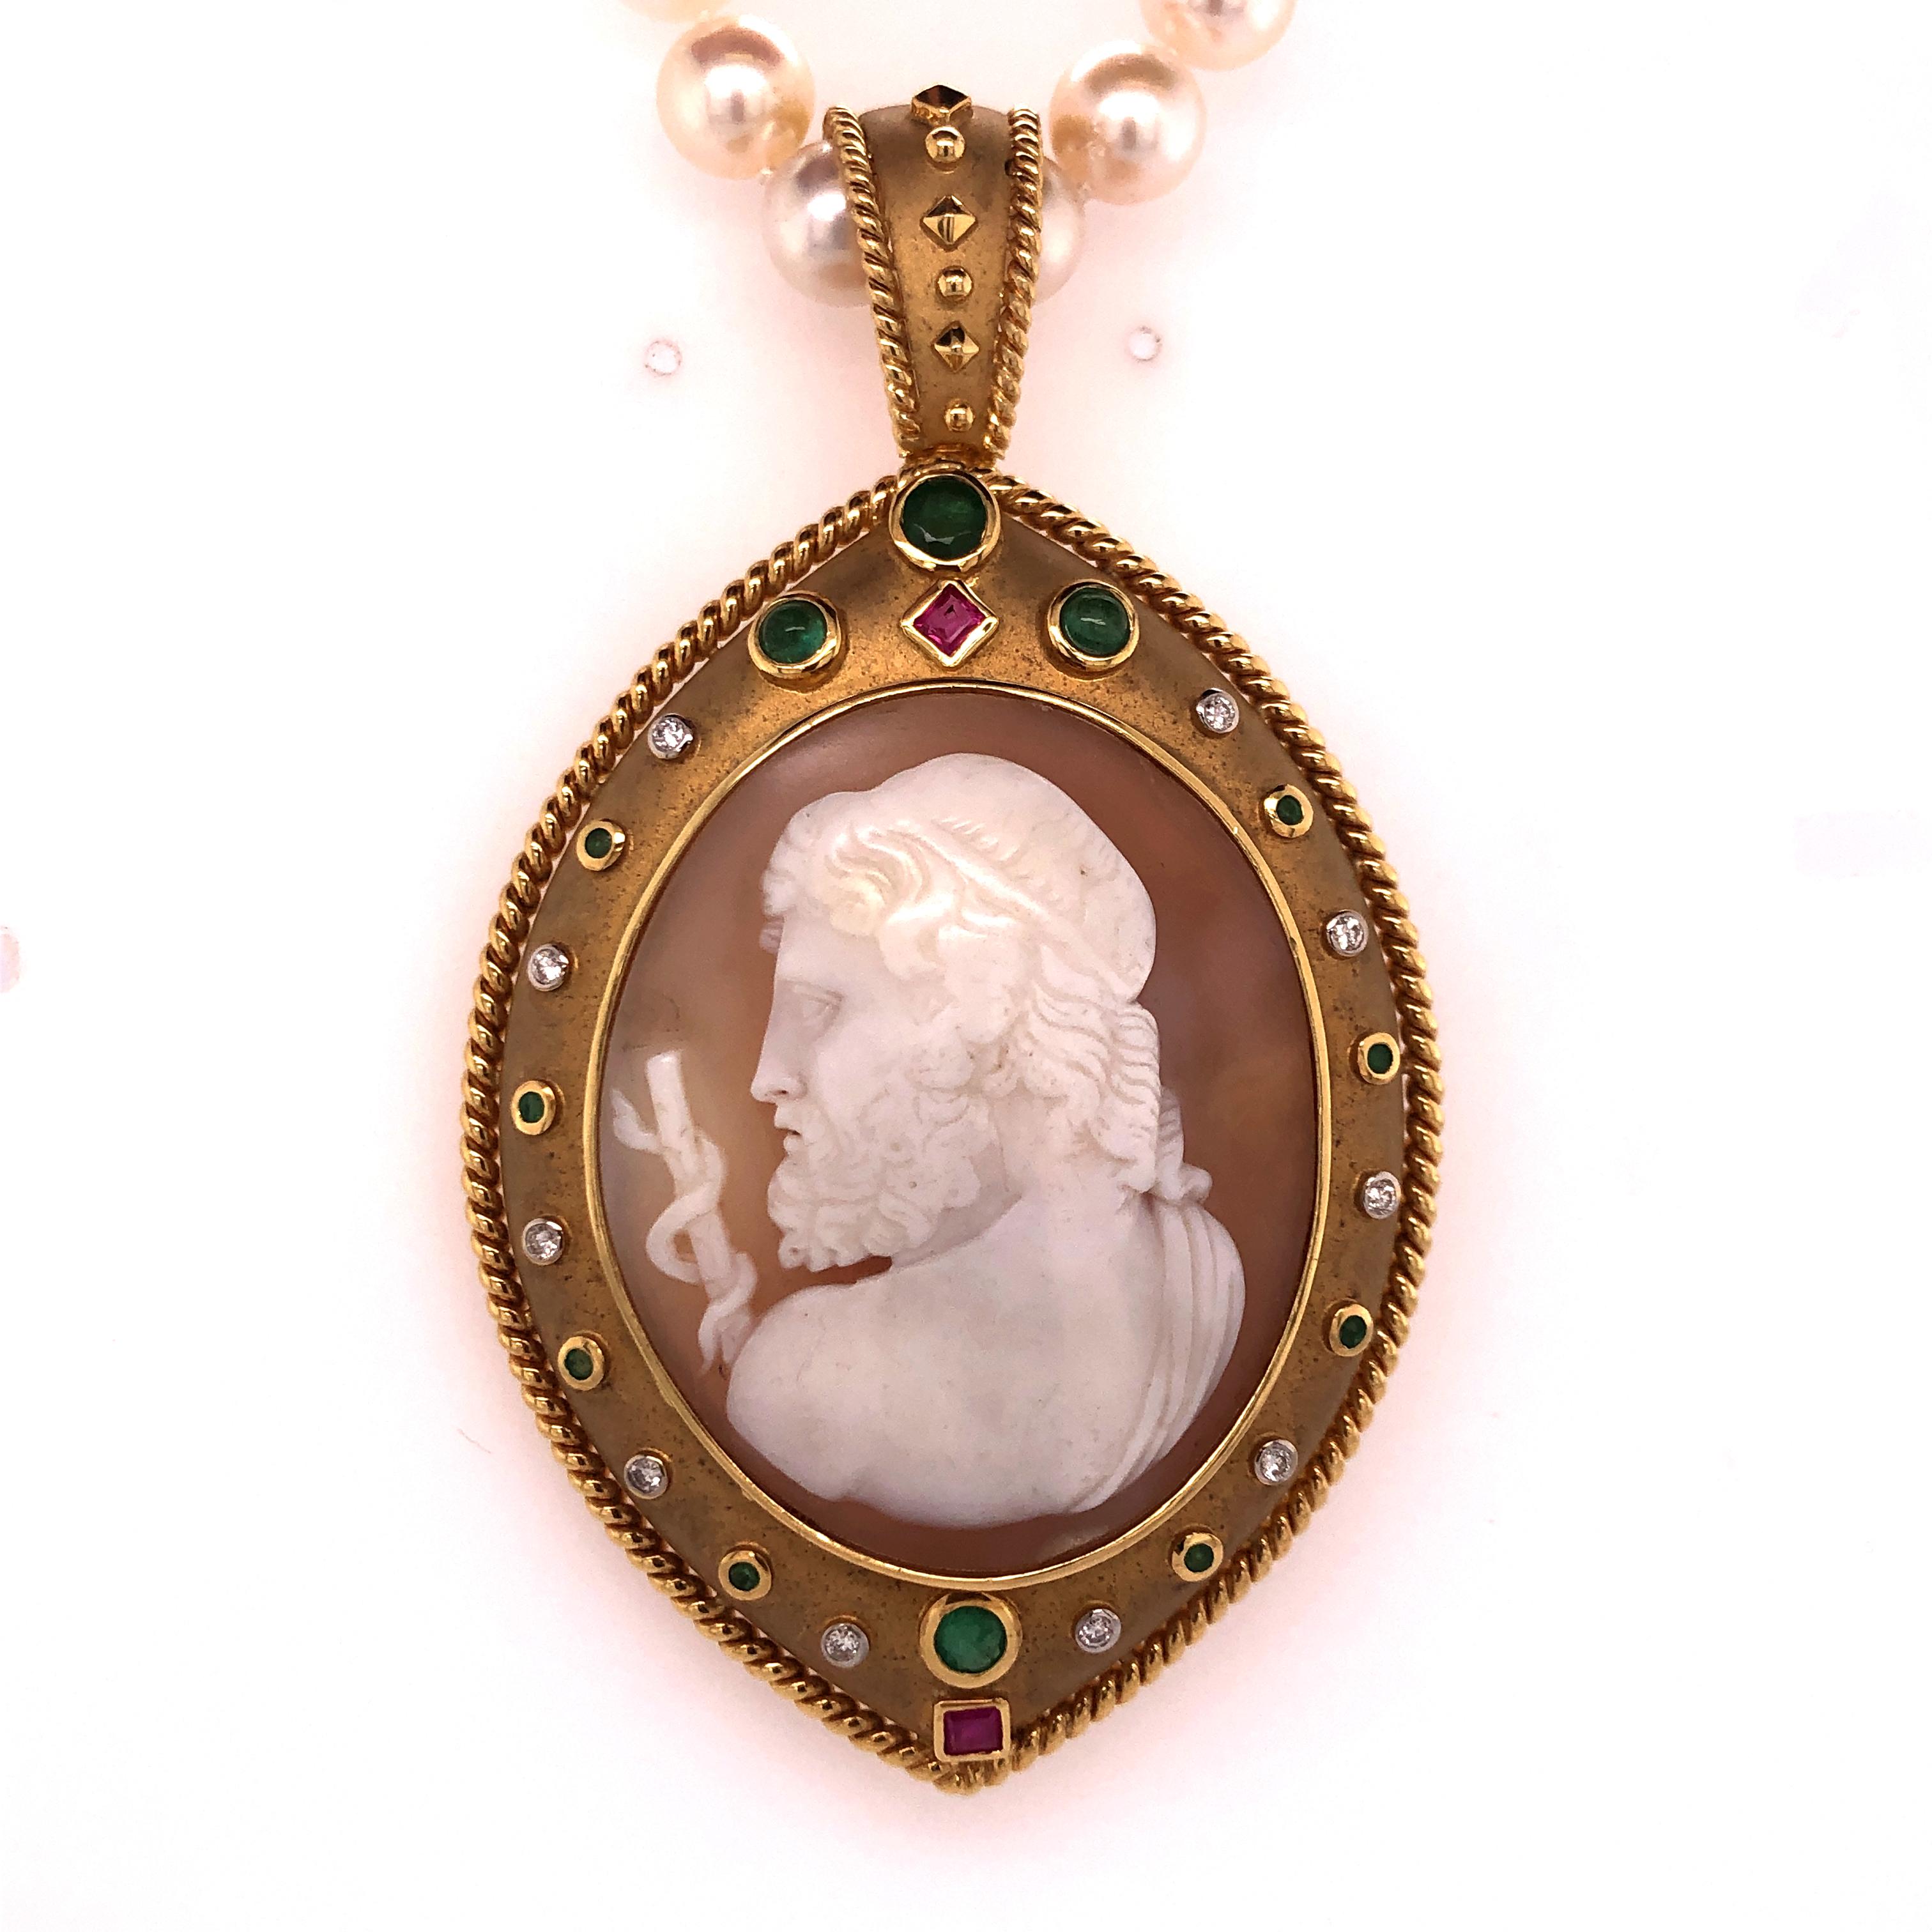 Taking center stage, the Greek god Asceplius, the god of medicine and healing, wields his staff as he looks over his left shoulder in the large cameo that is set into an marquise-esque  18K yellow gold necklace enhancer. The setting is adorned with